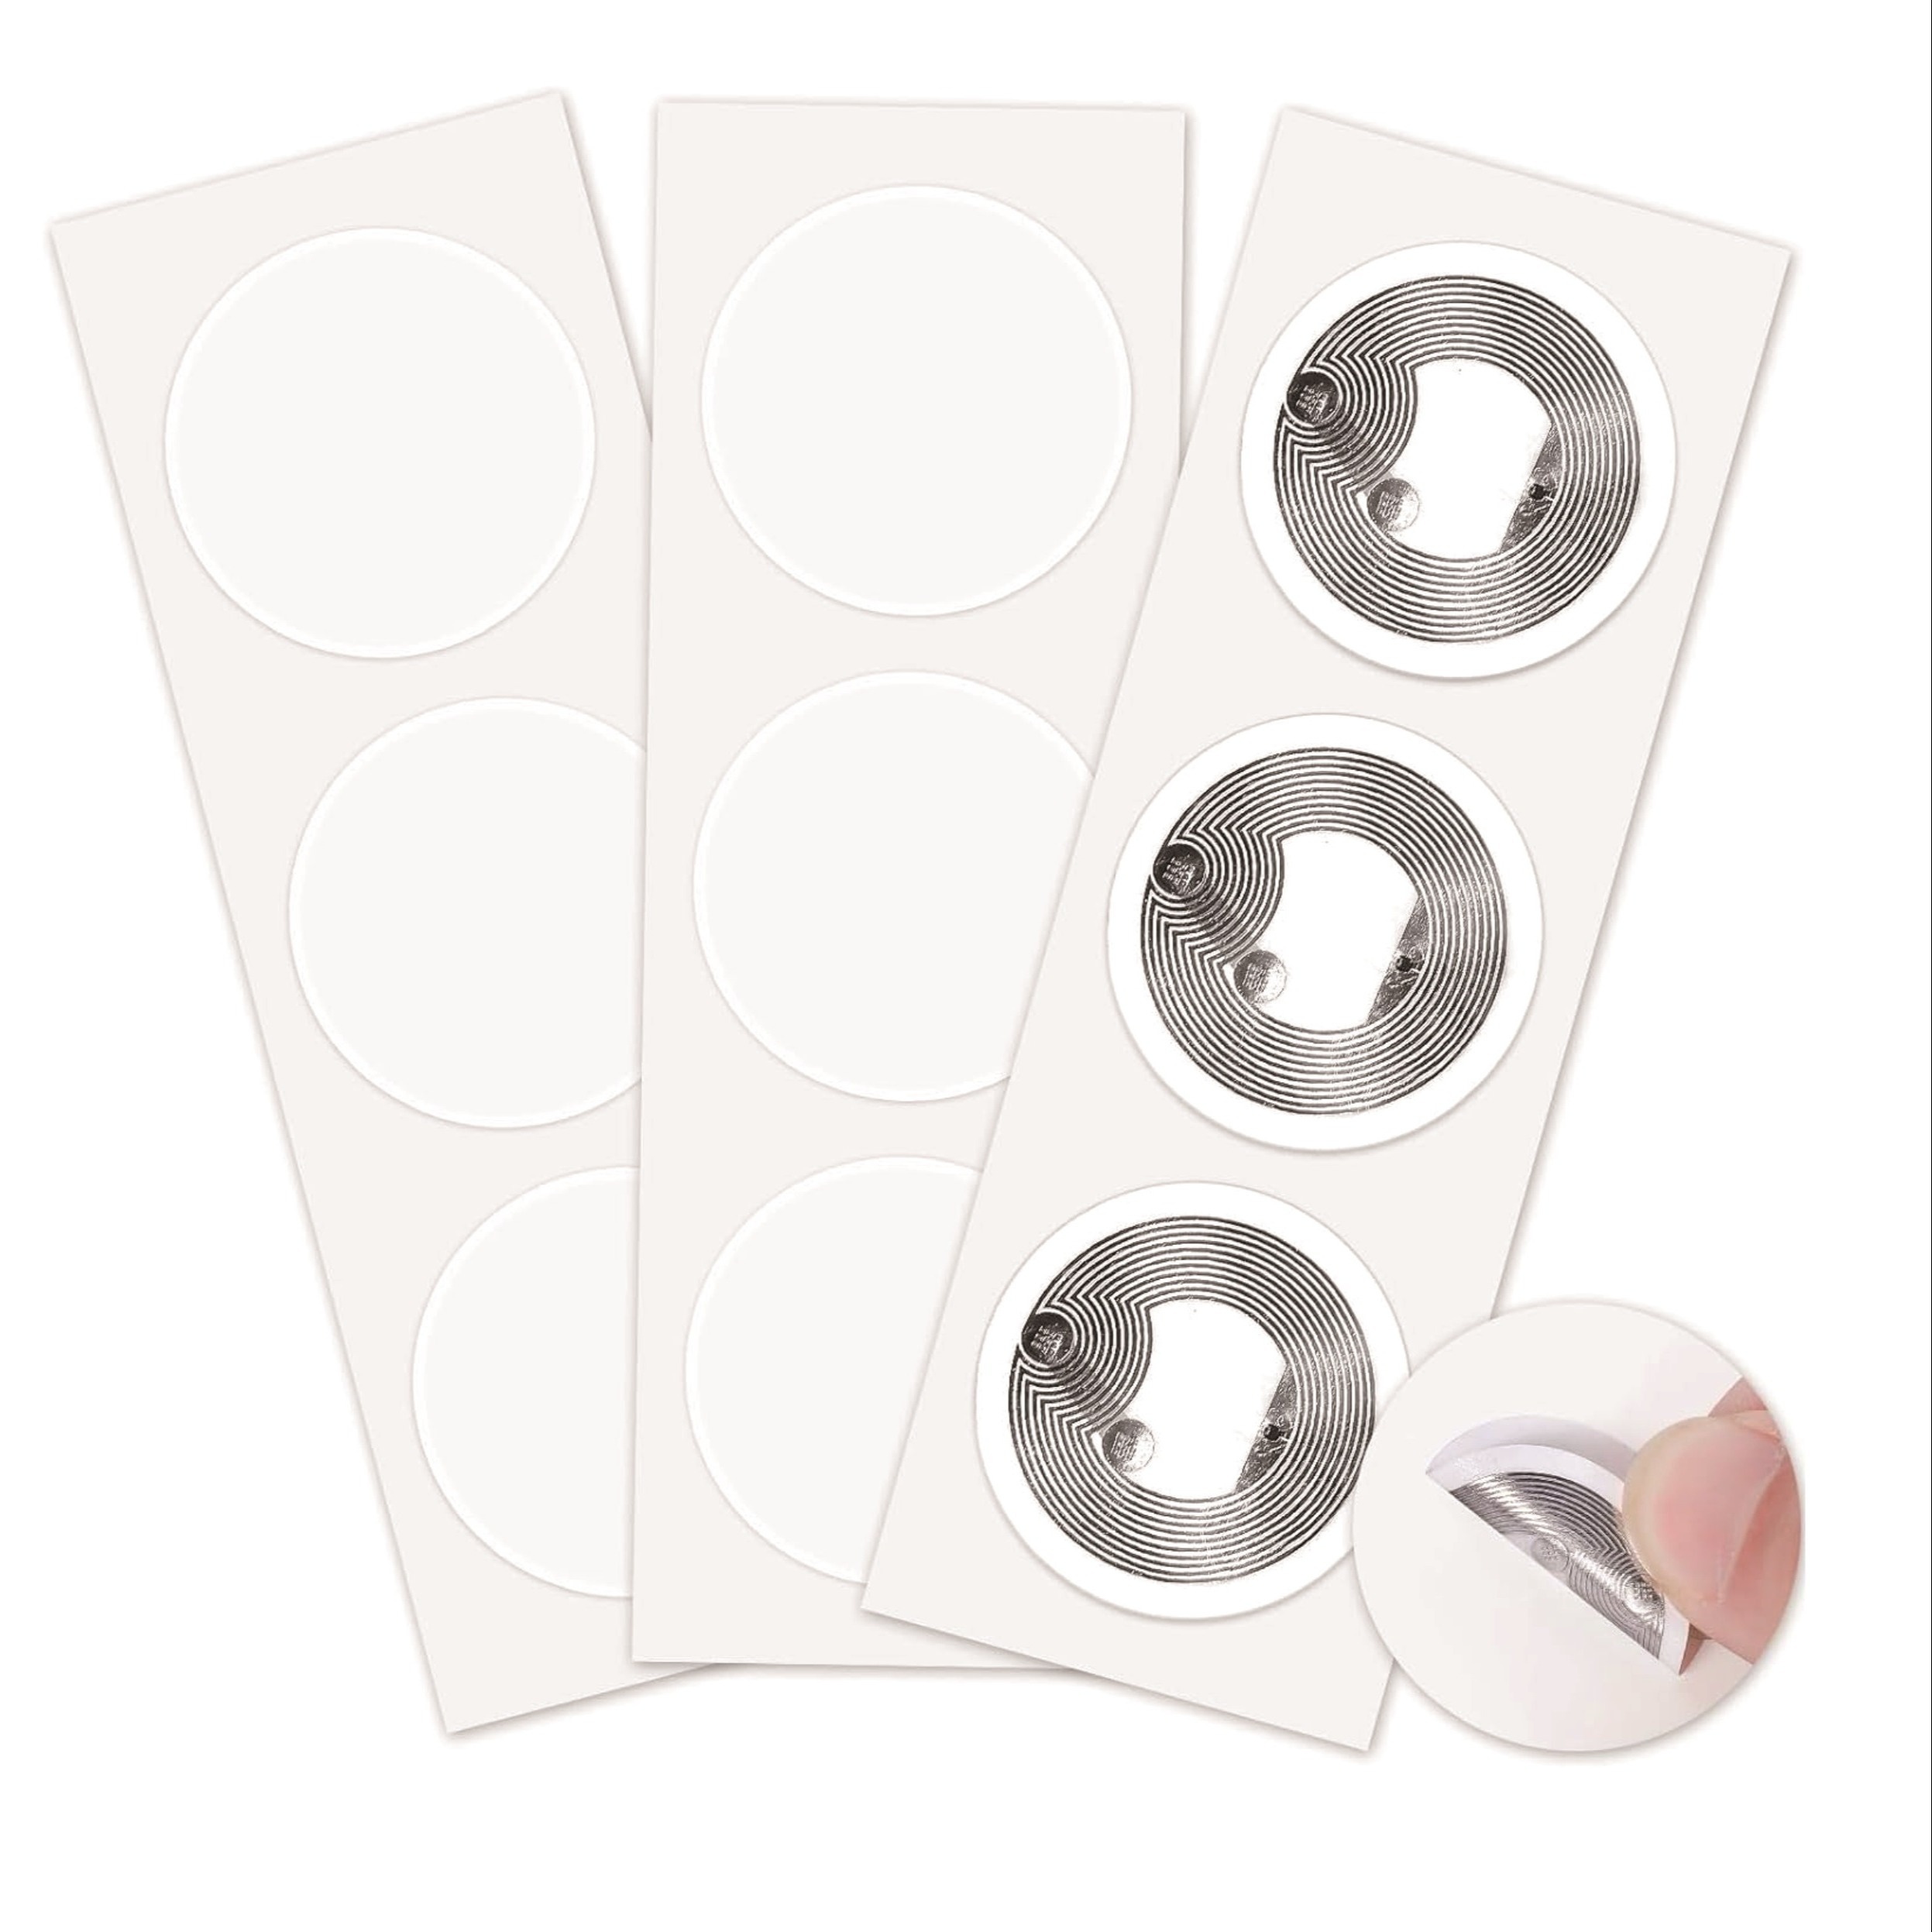 

Ntag 215 Tags Stickers, Blank Rewritable Pvc Nfc Card Round Tag 25mm Rfid Tag 504 Bytes Memory Nfc Chip, Compatible With Tagmo And Nfc-enabled Cell Phone & Devices,rfid Stickers